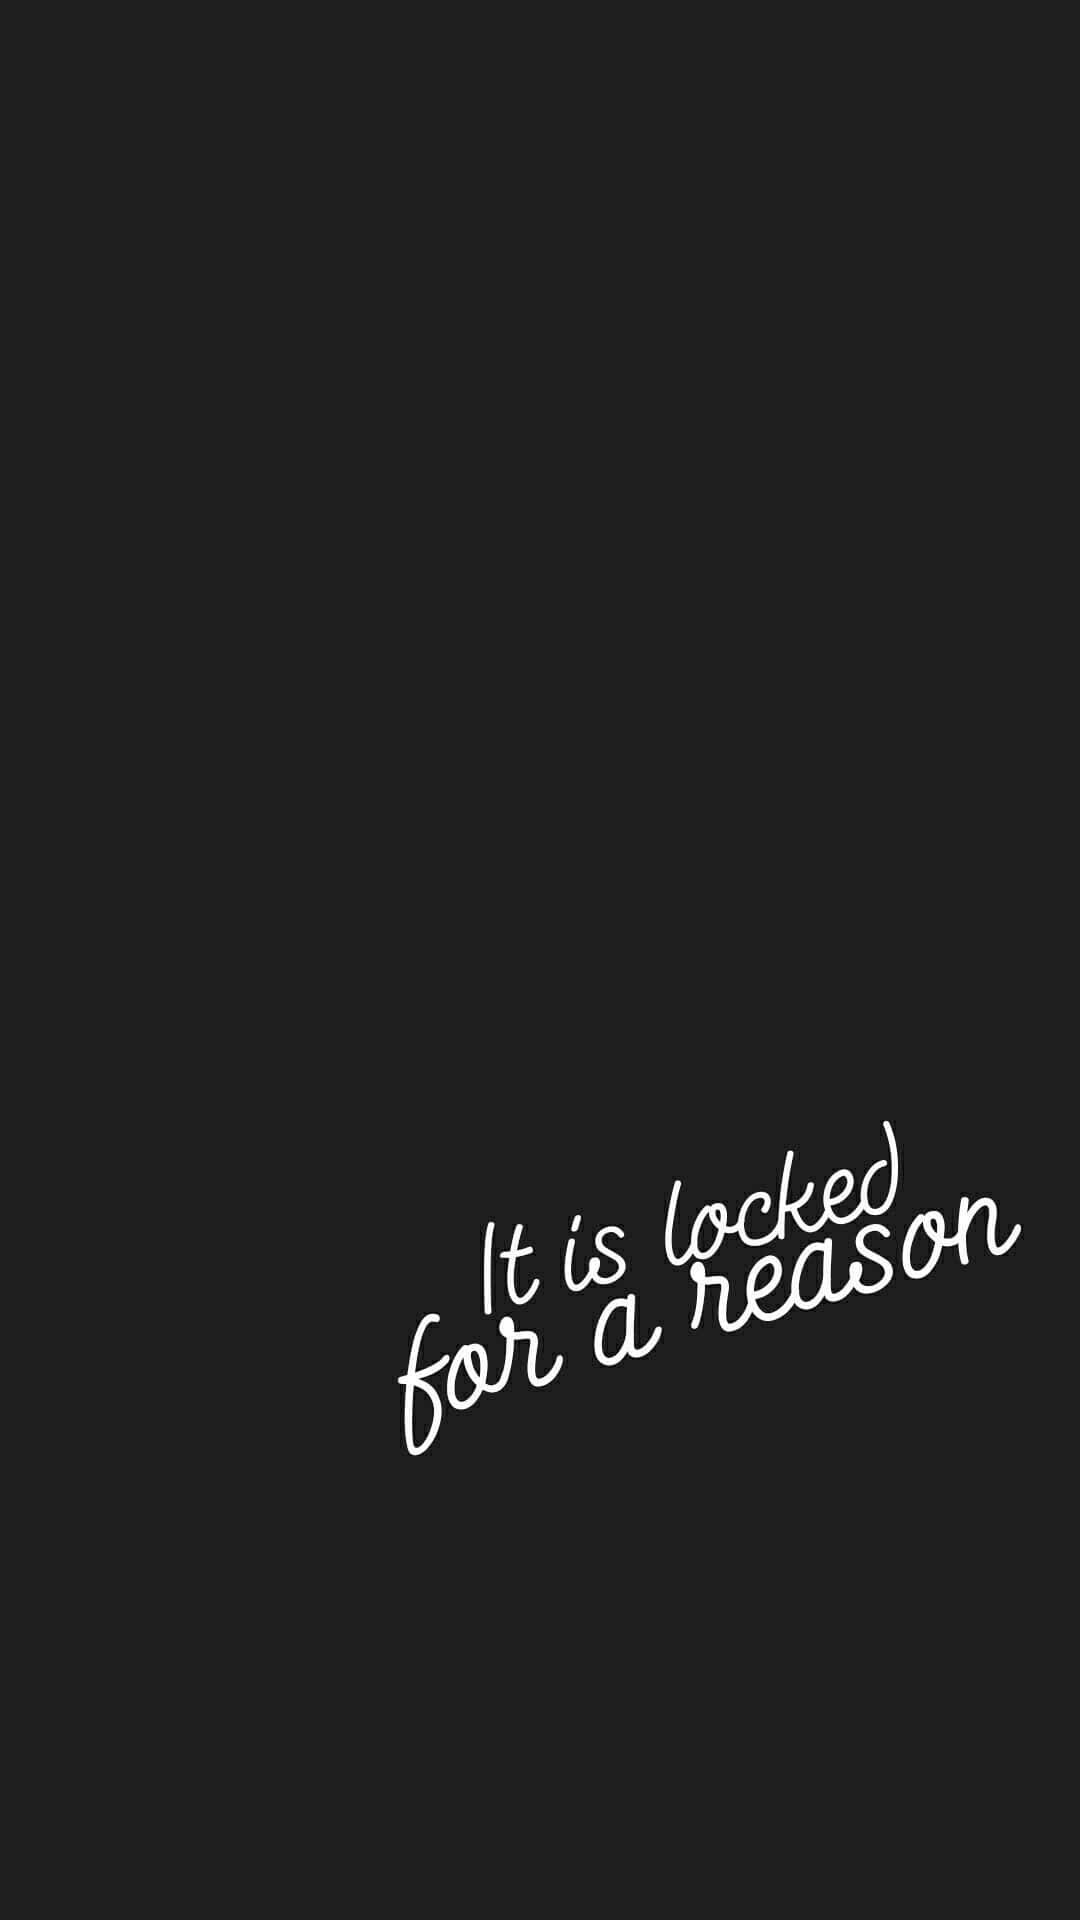 Download It Is Locked For A Reason Funny Lock Screen Wallpaper | Wallpapers .com